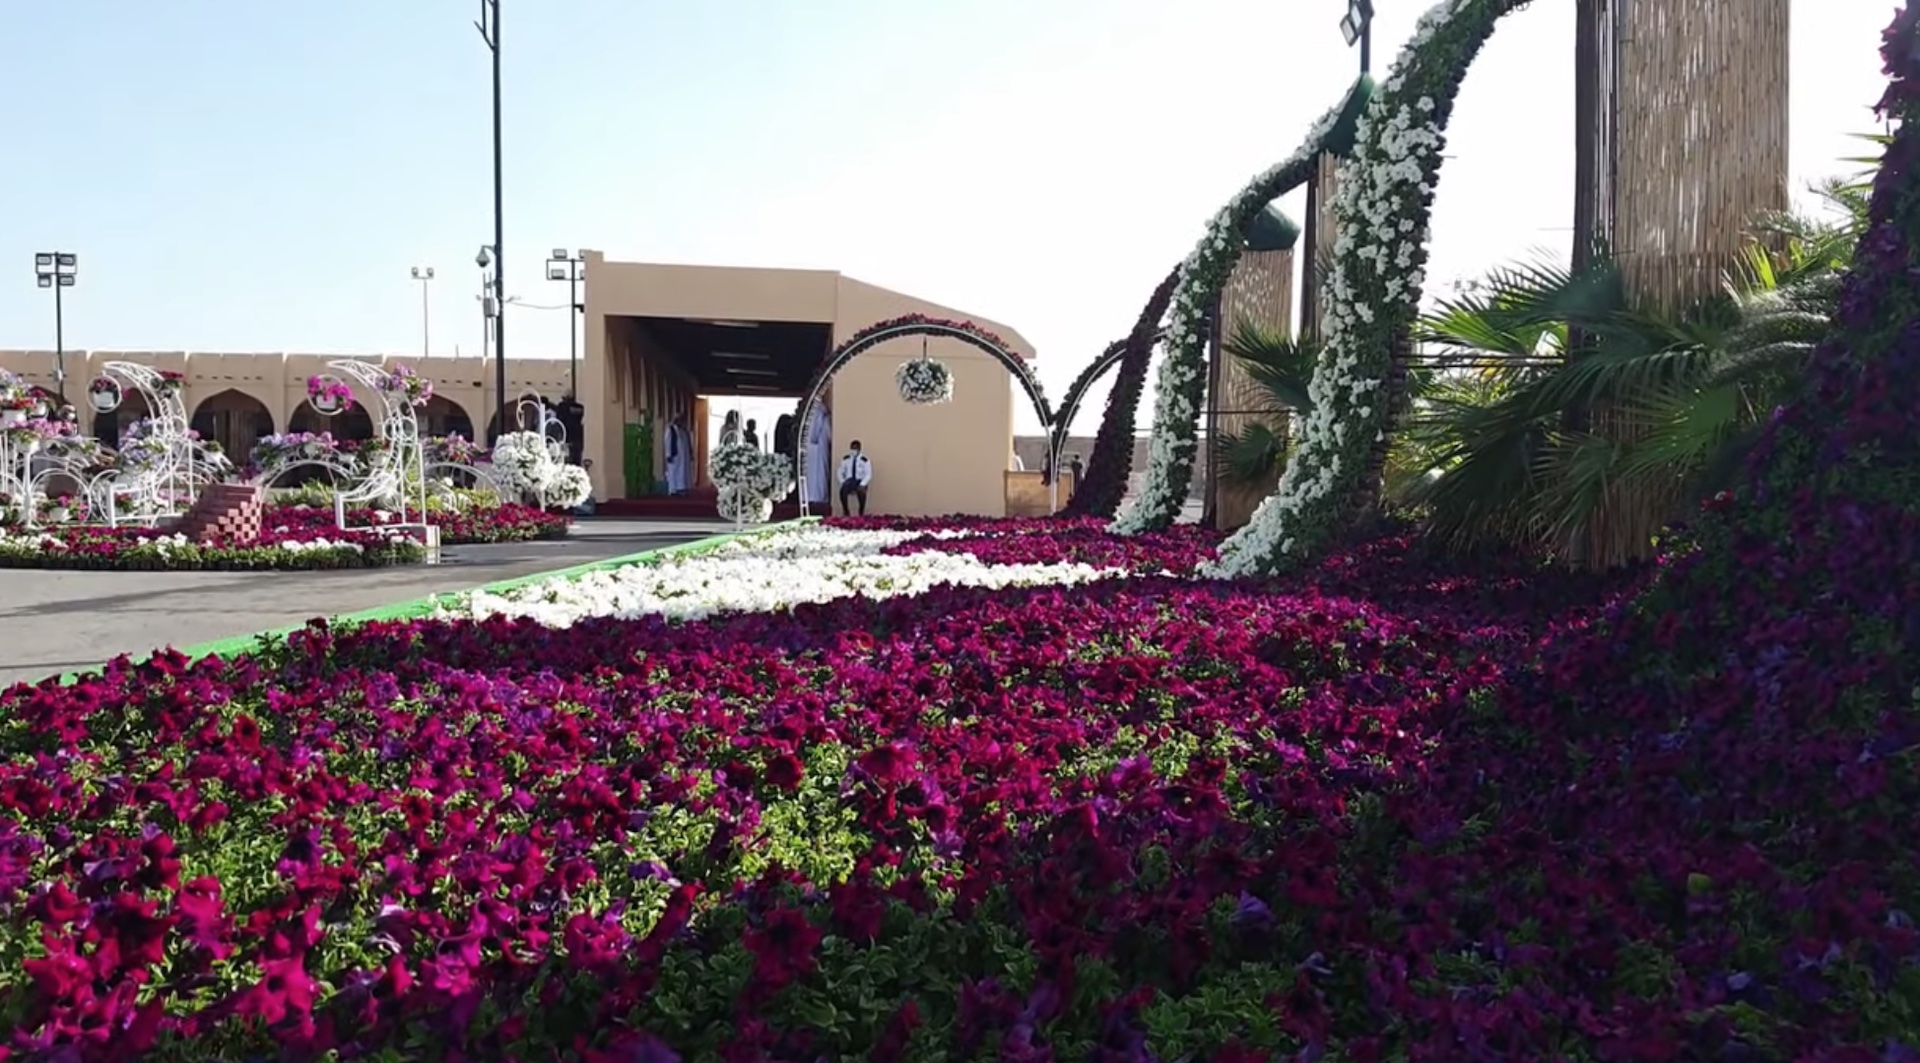 The sixth Mahaseel festival takes place in Katara with 38 stalls